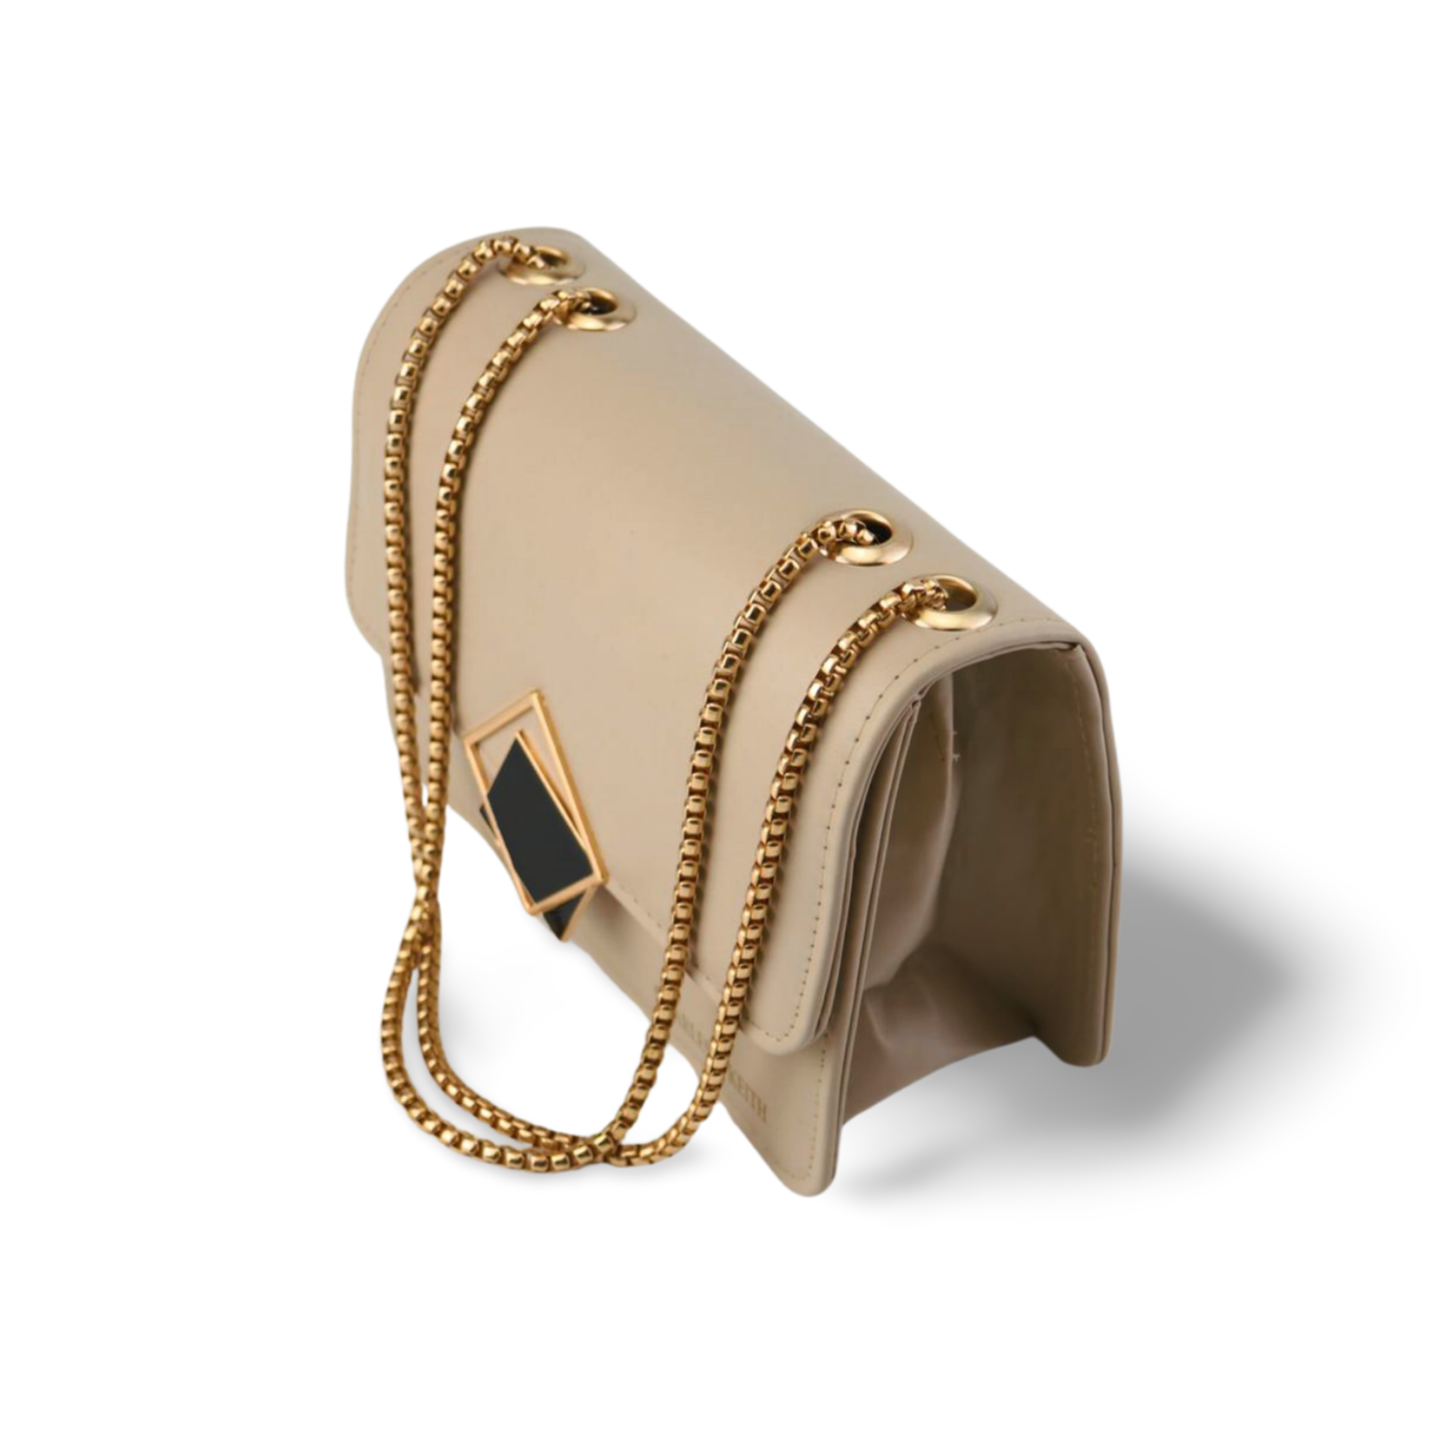 Latest fashion Crossbody Bag with Gold Chain and Square Buckle